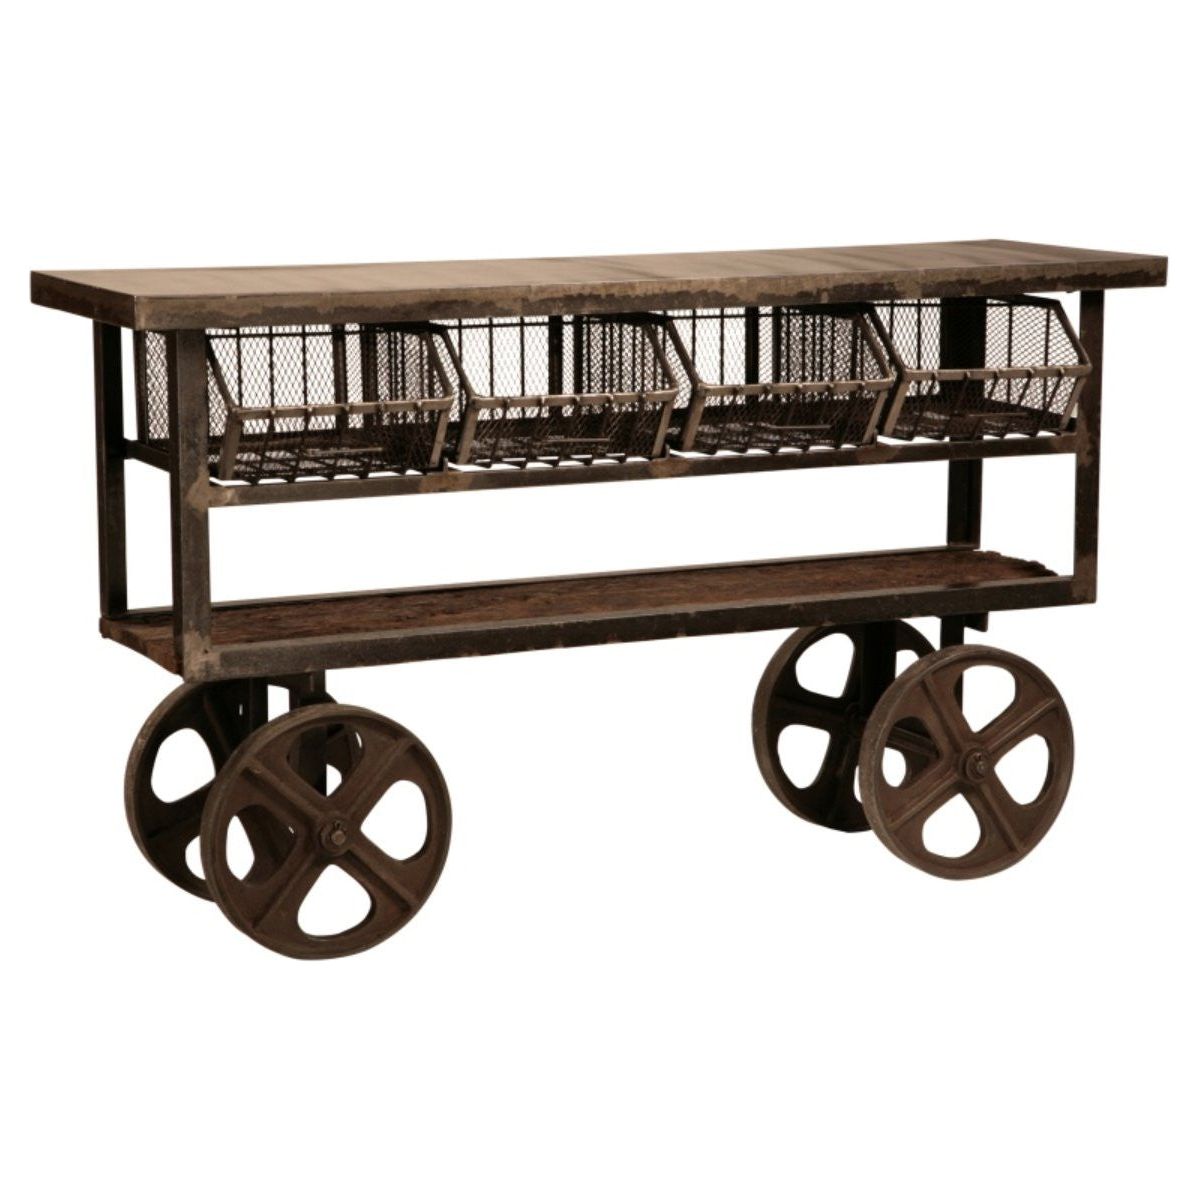 Urban Industrial Trolley with Metal Basket Drawers and Reclaimed Wood Top